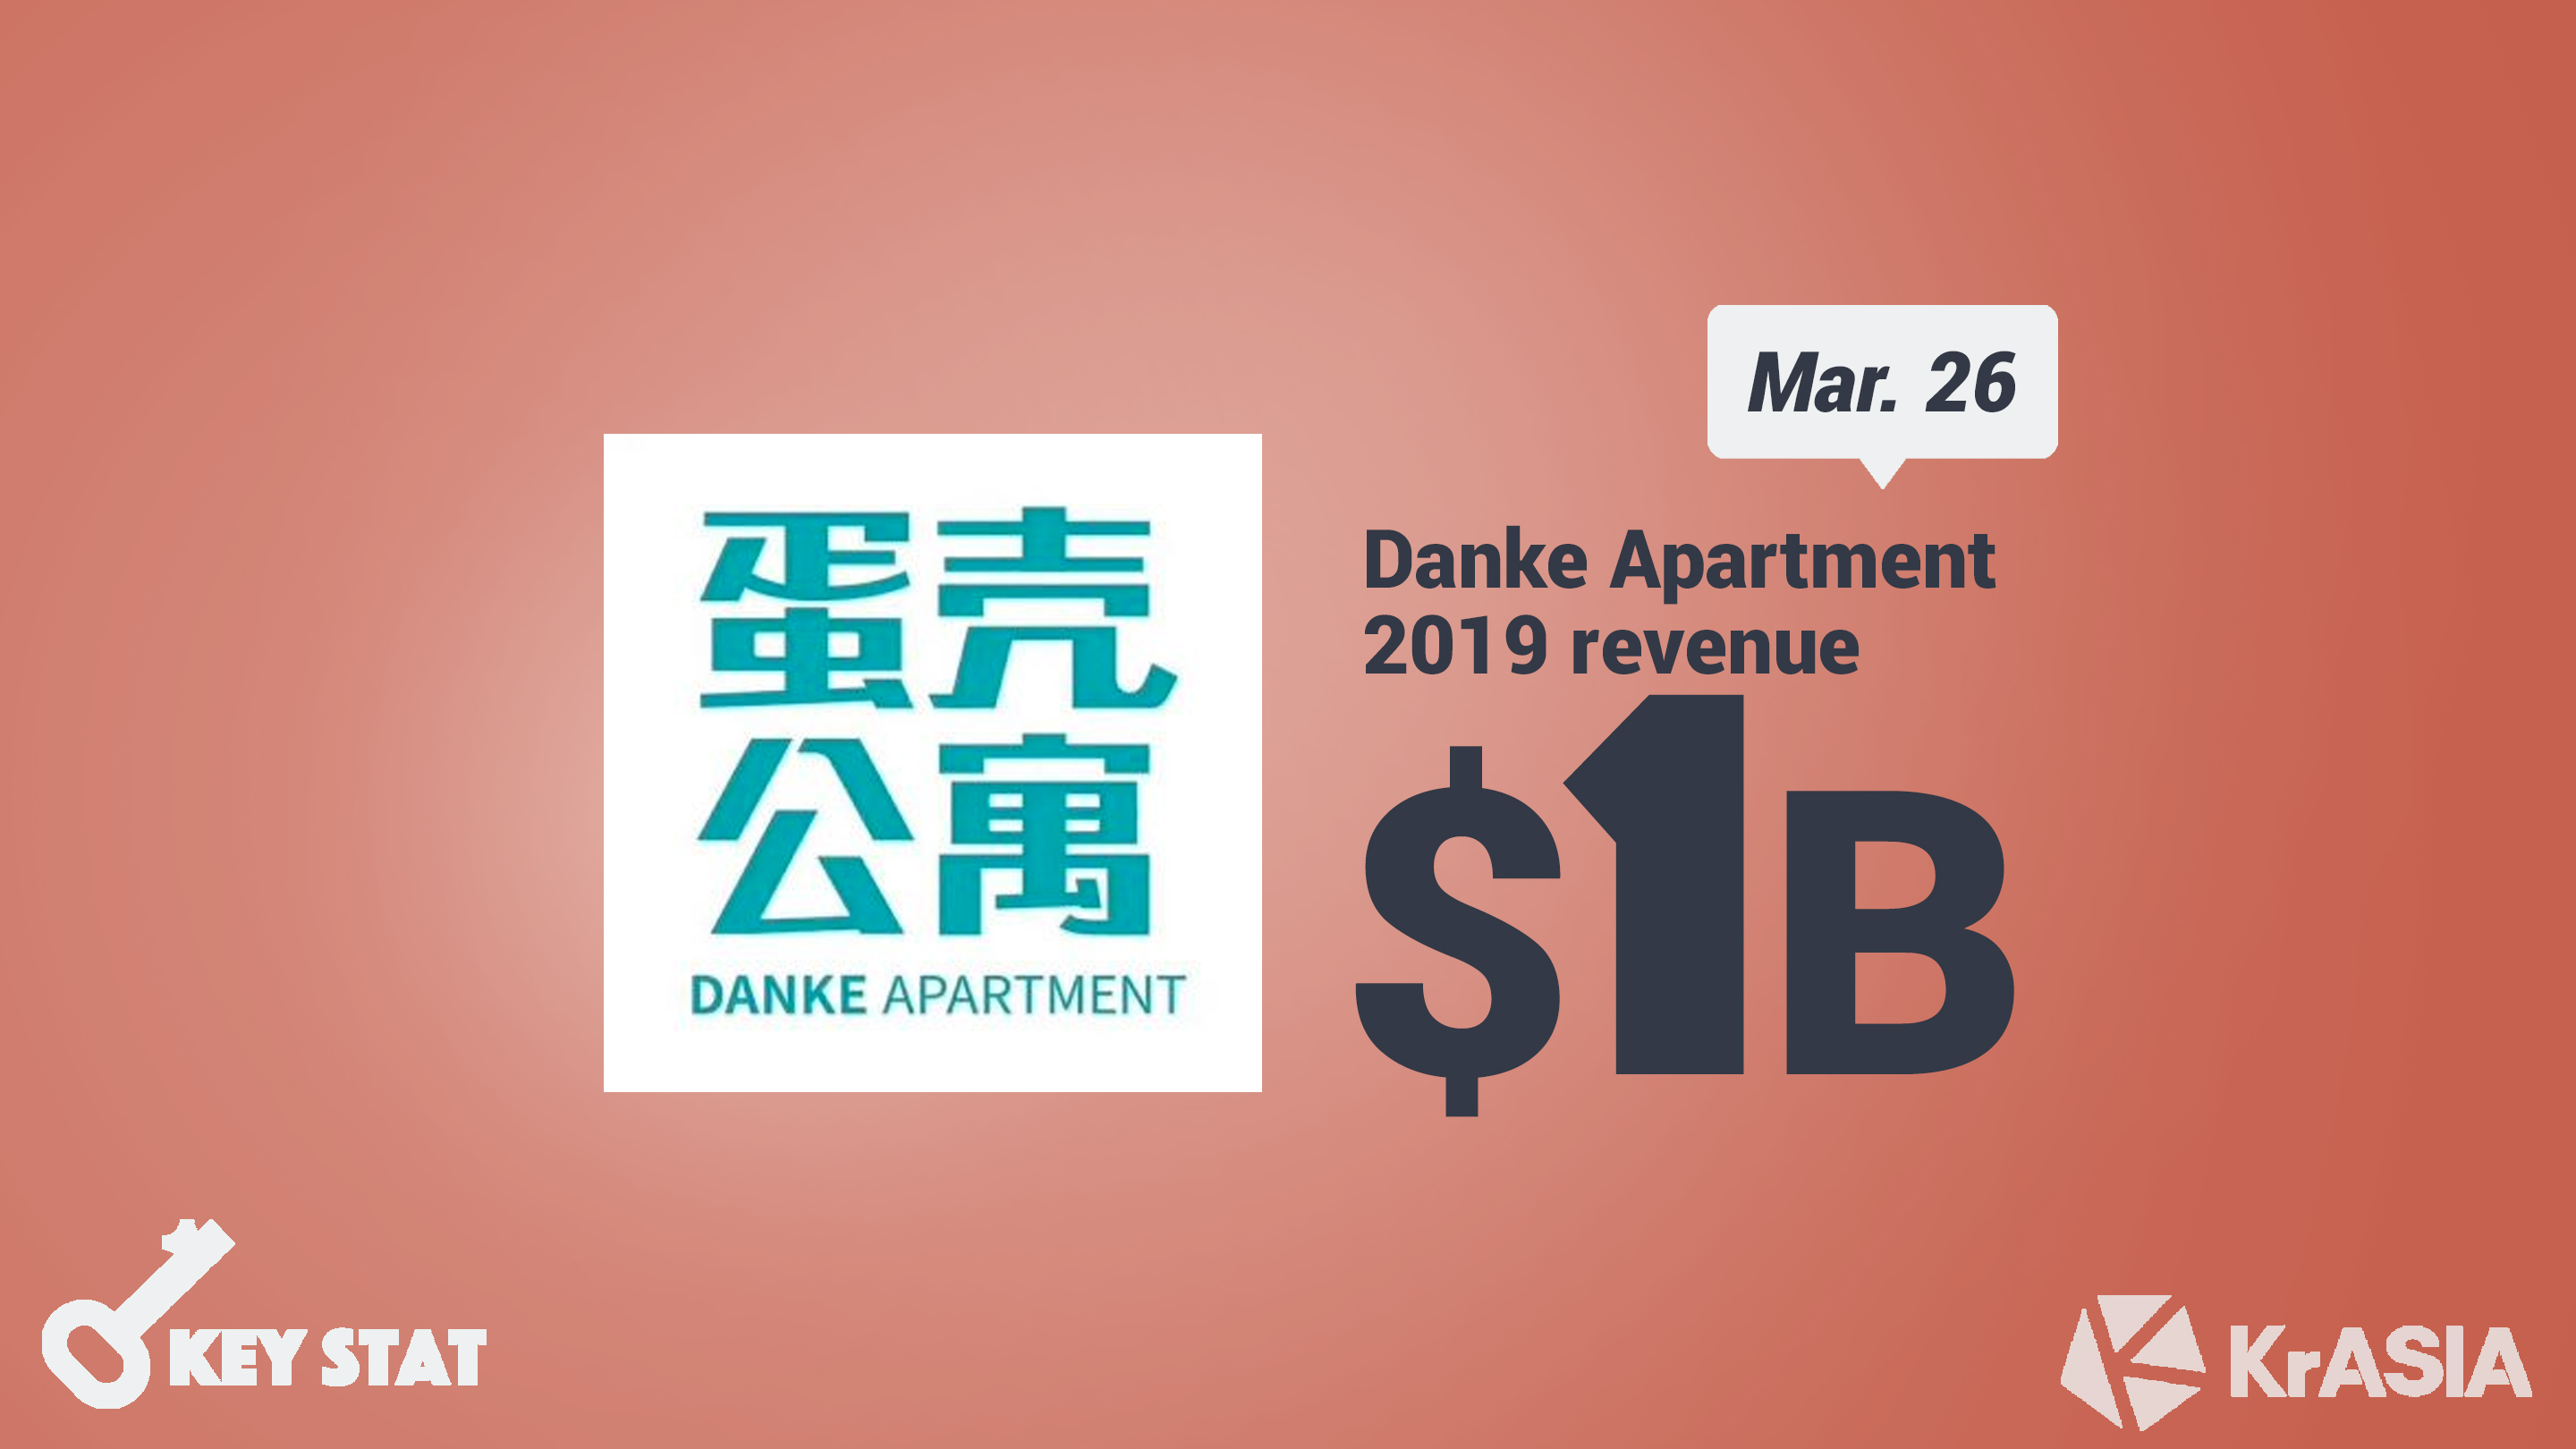 KEY STAT | Danke Apartment retains high expansion speed while net loss widens